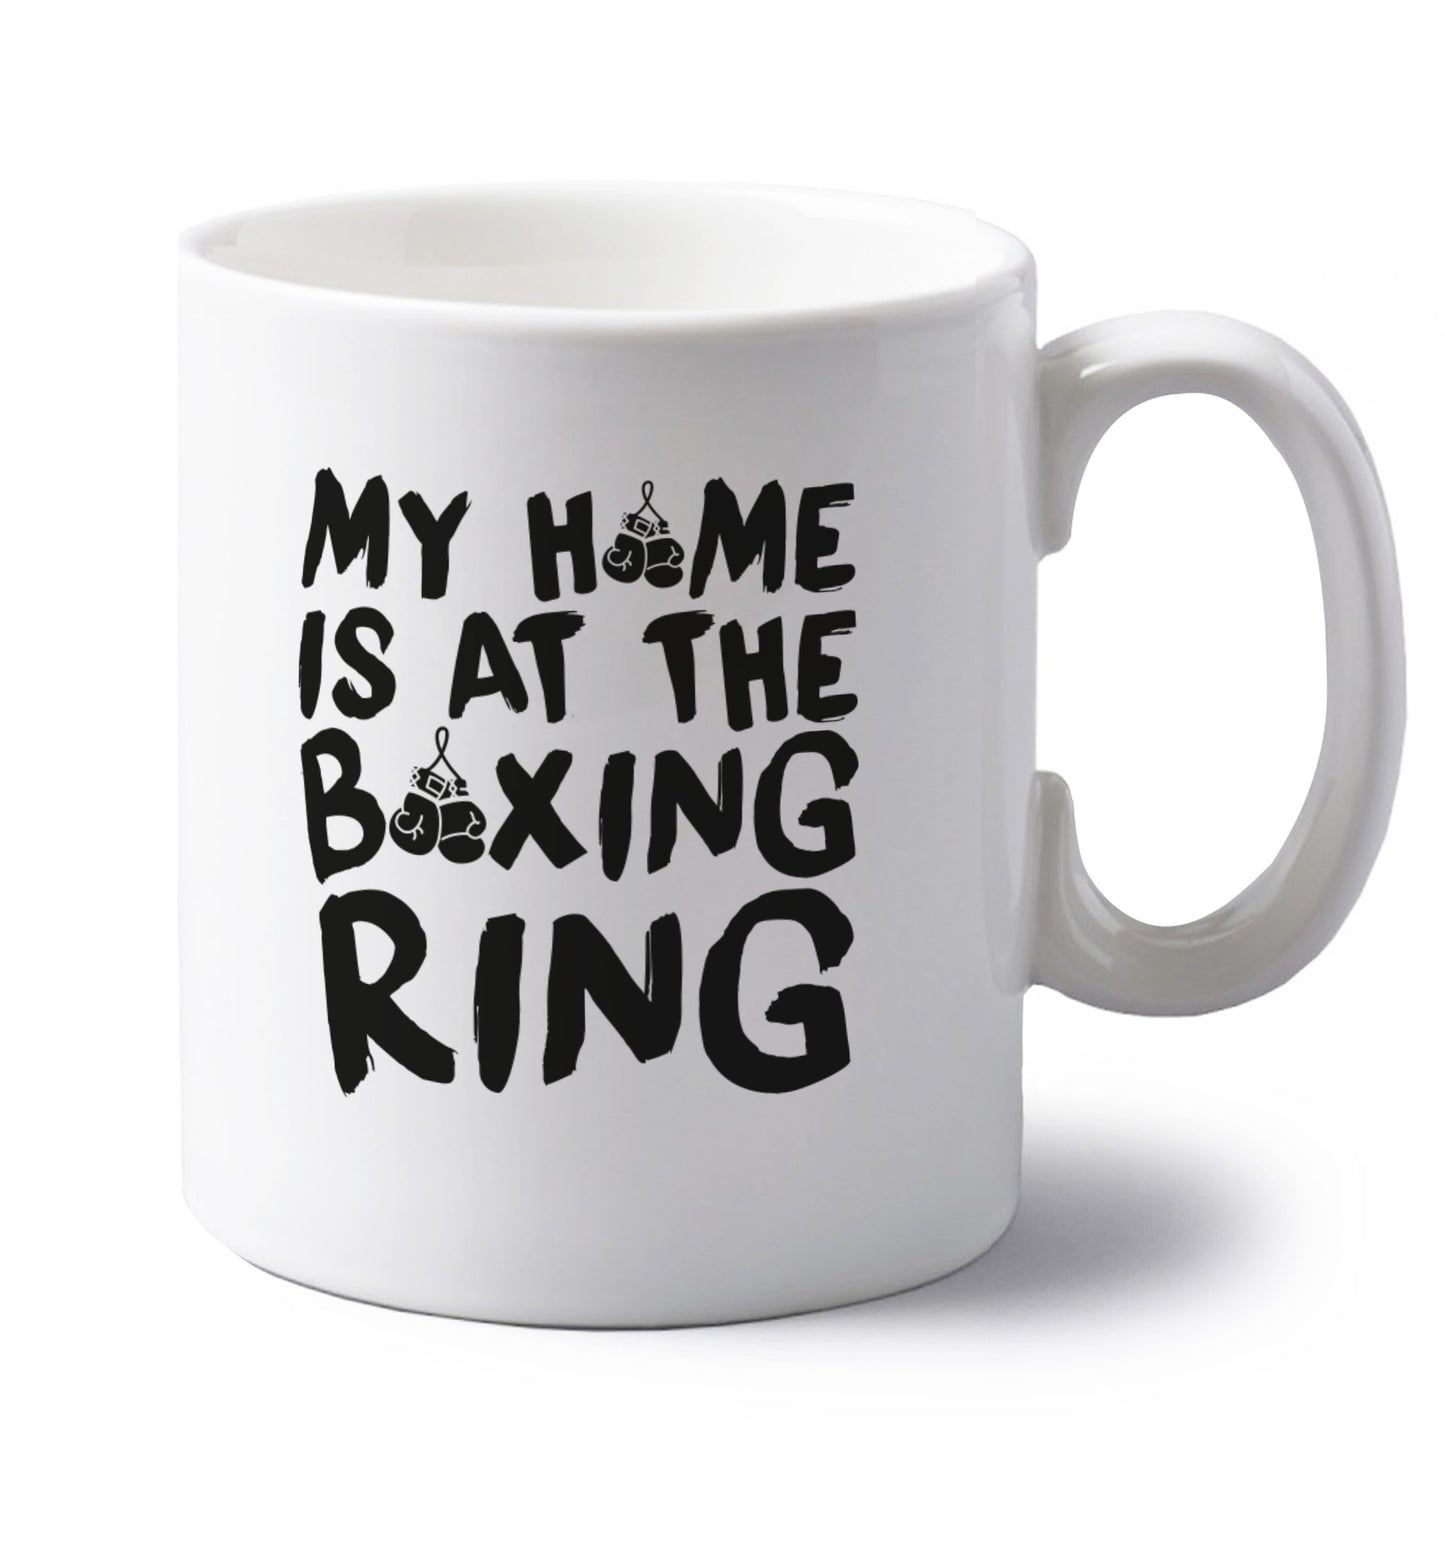 My home is at the boxing ring left handed white ceramic mug 